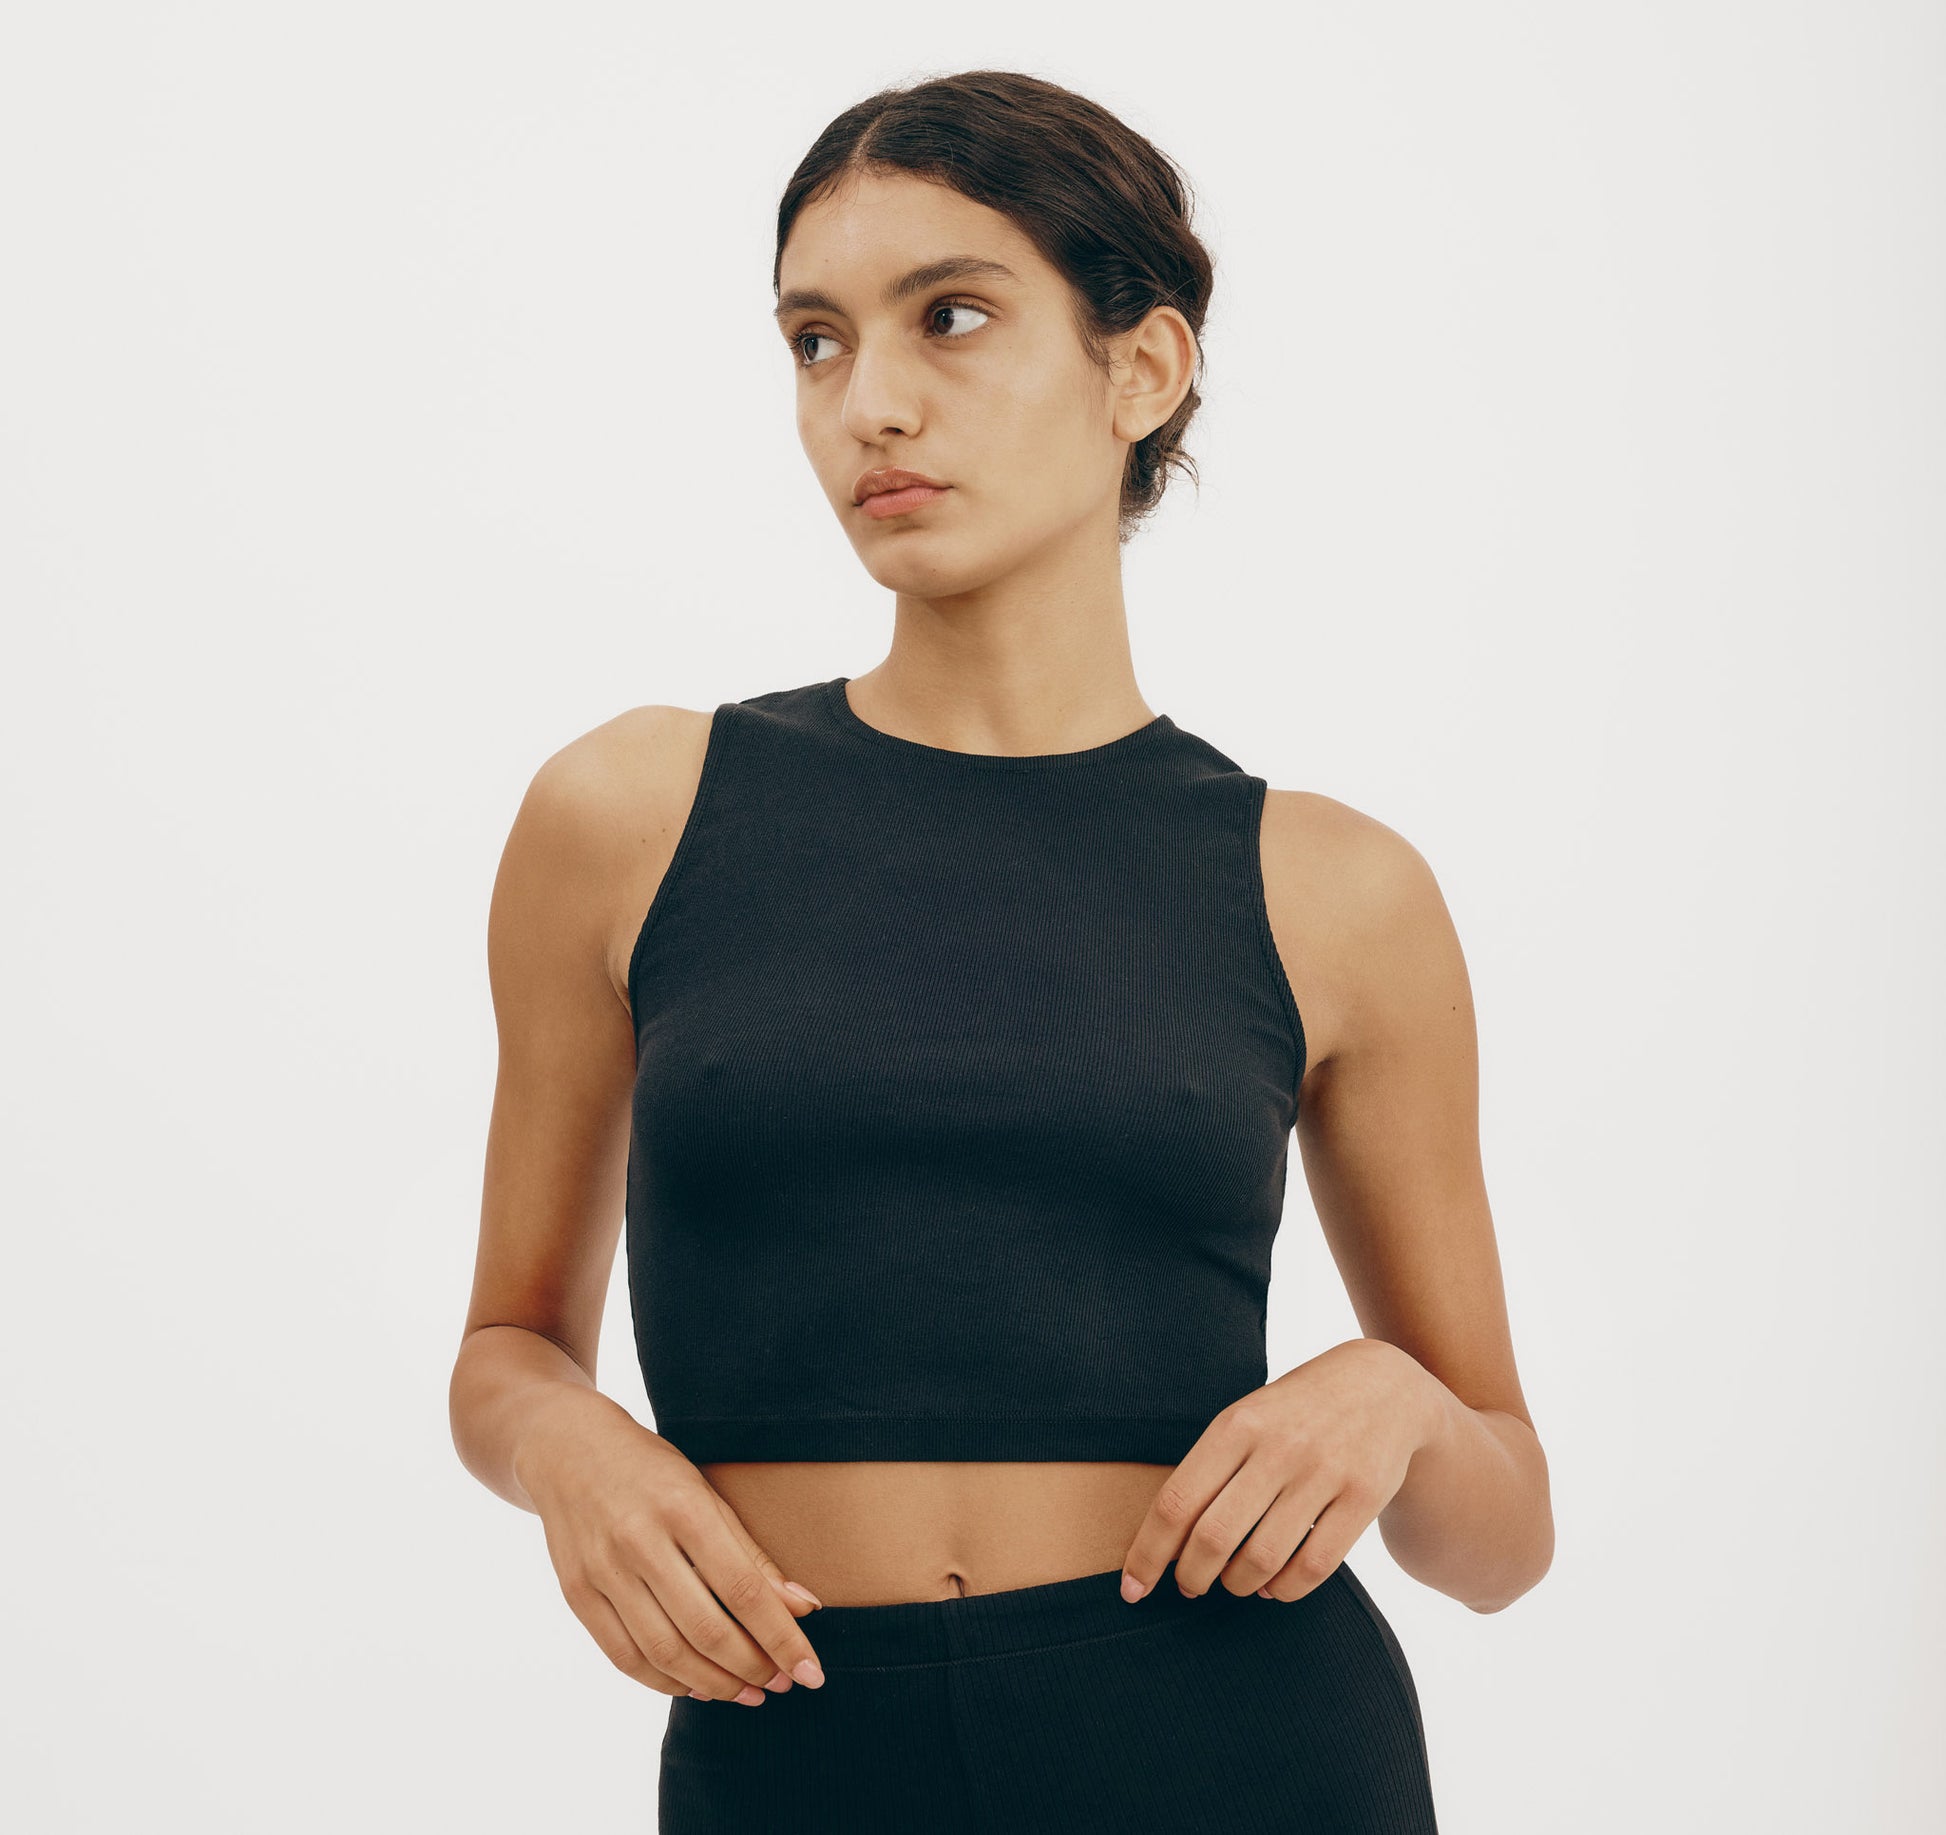 Check styling ideas for「Ribbed Cropped Sleeveless Bra Top」